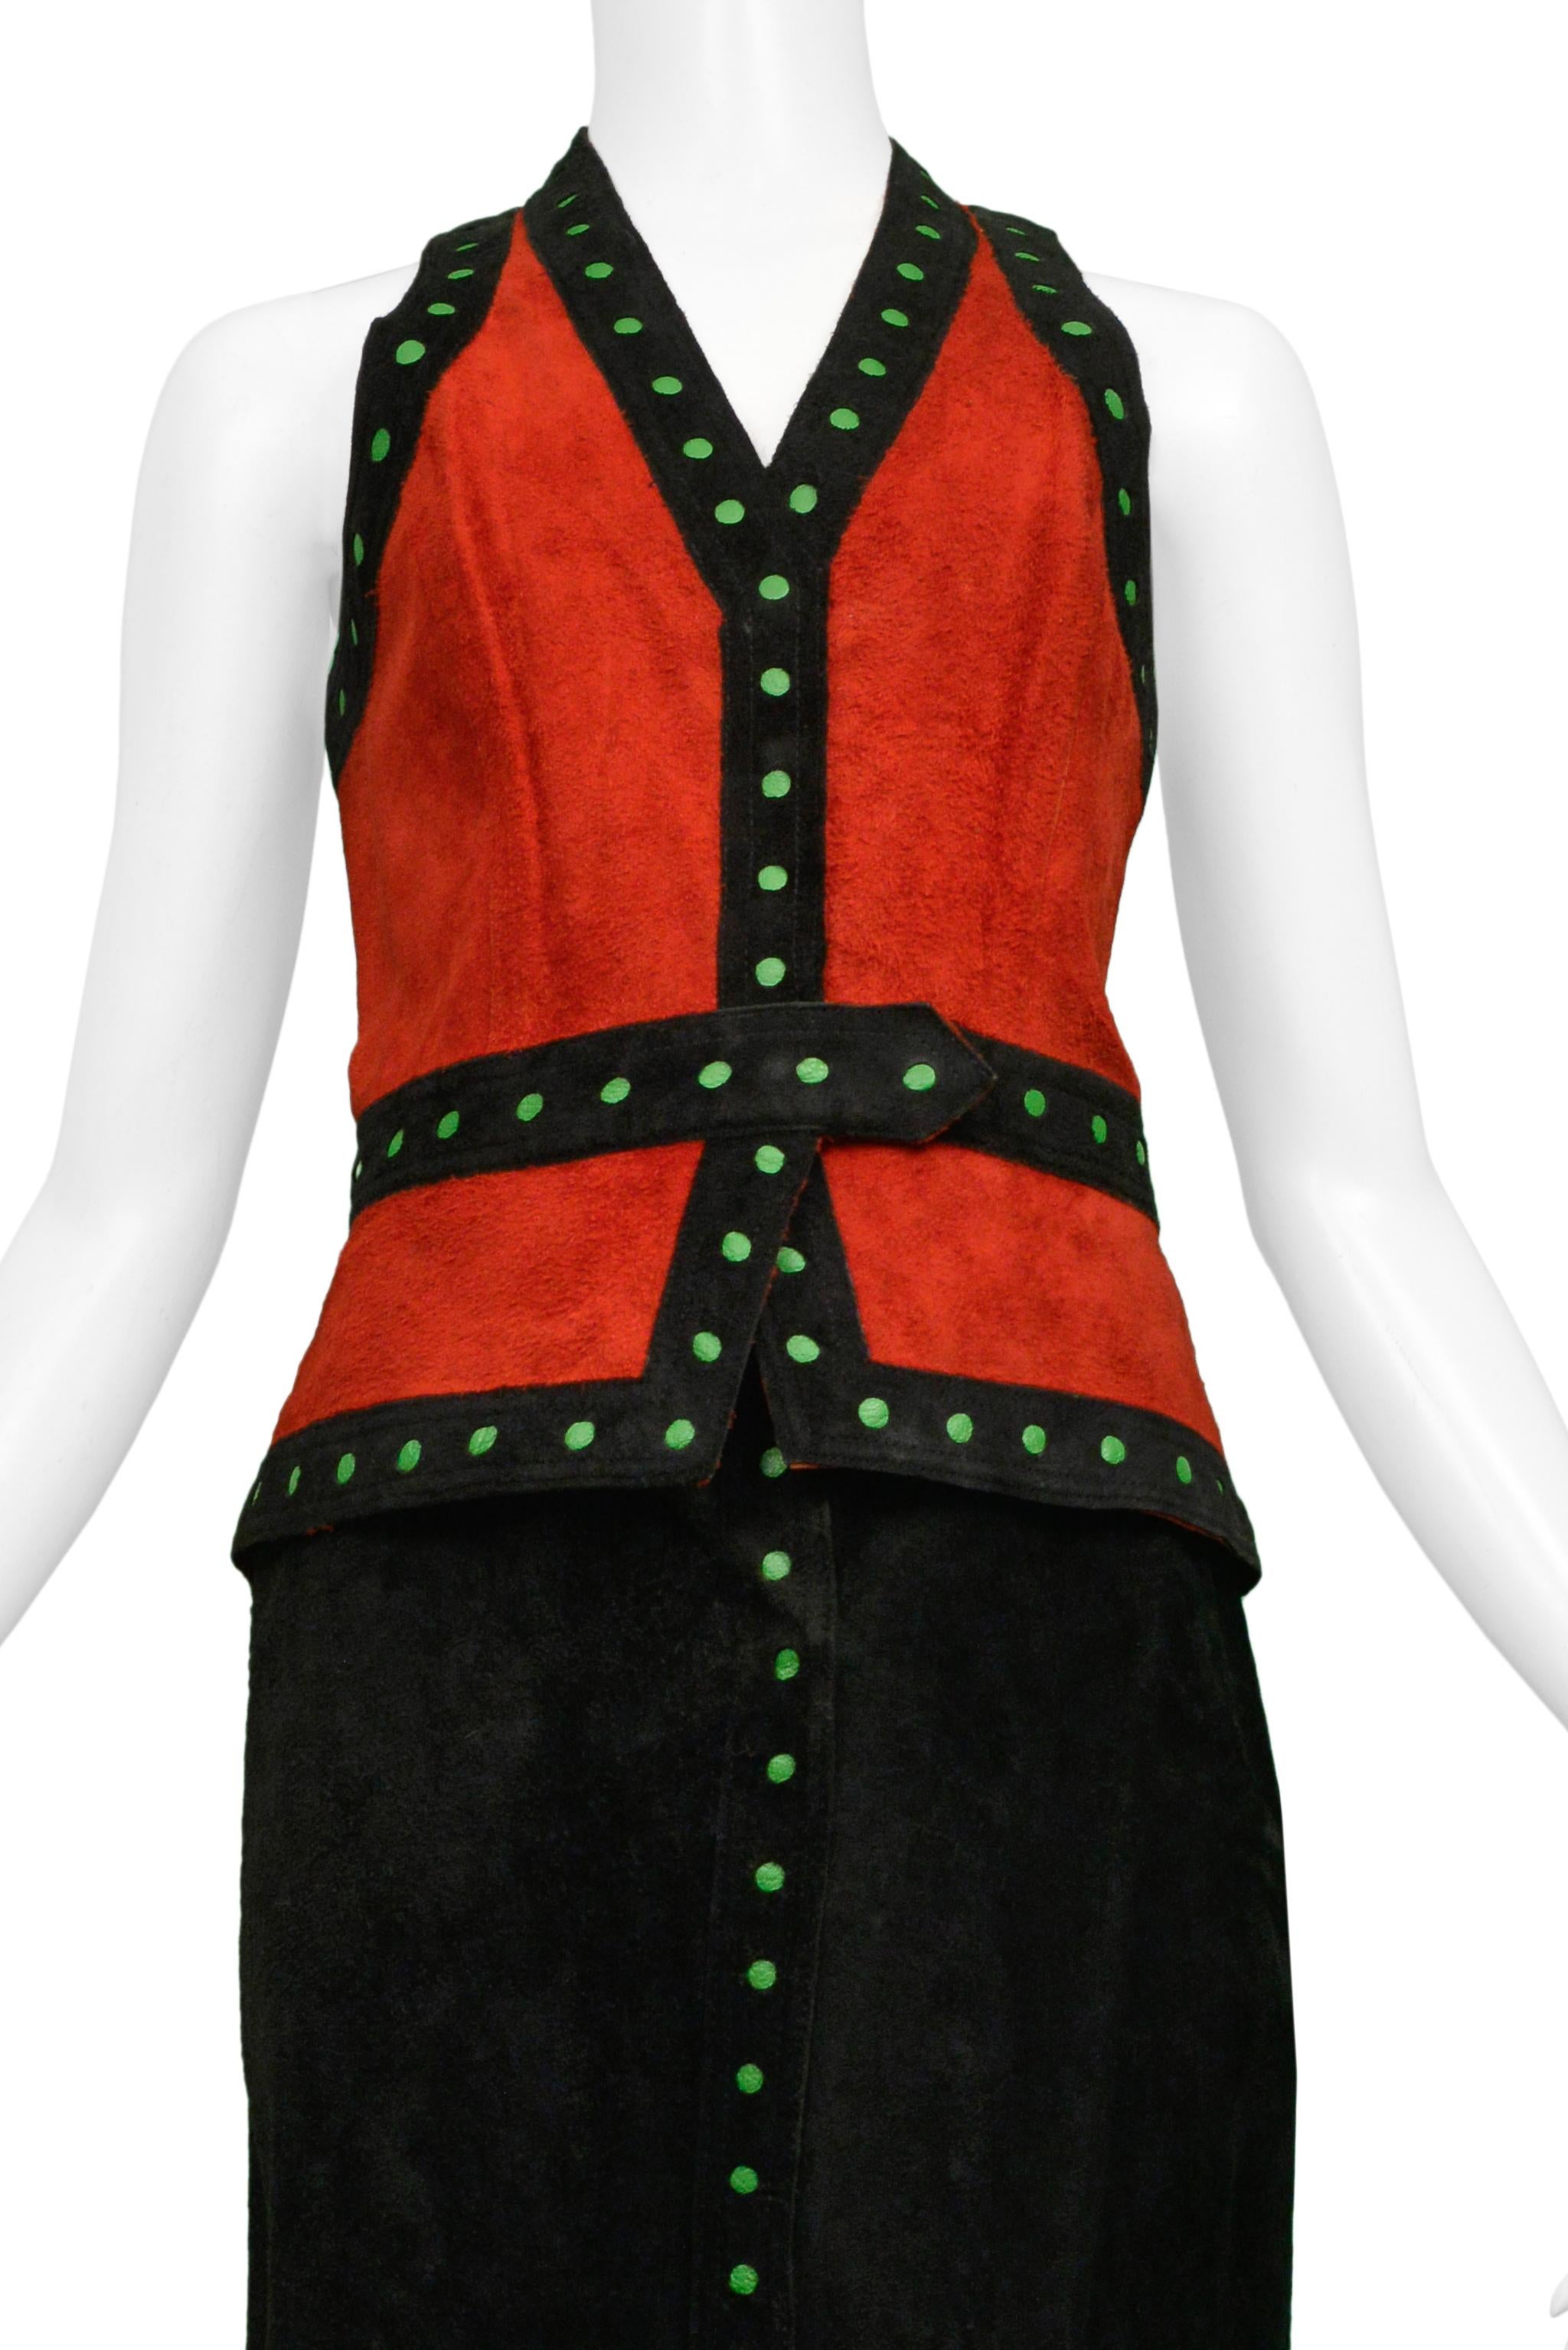 Beige Giorgio Sant Angelo Black & Red Suede Vest And Skirt Ensemble For Sale